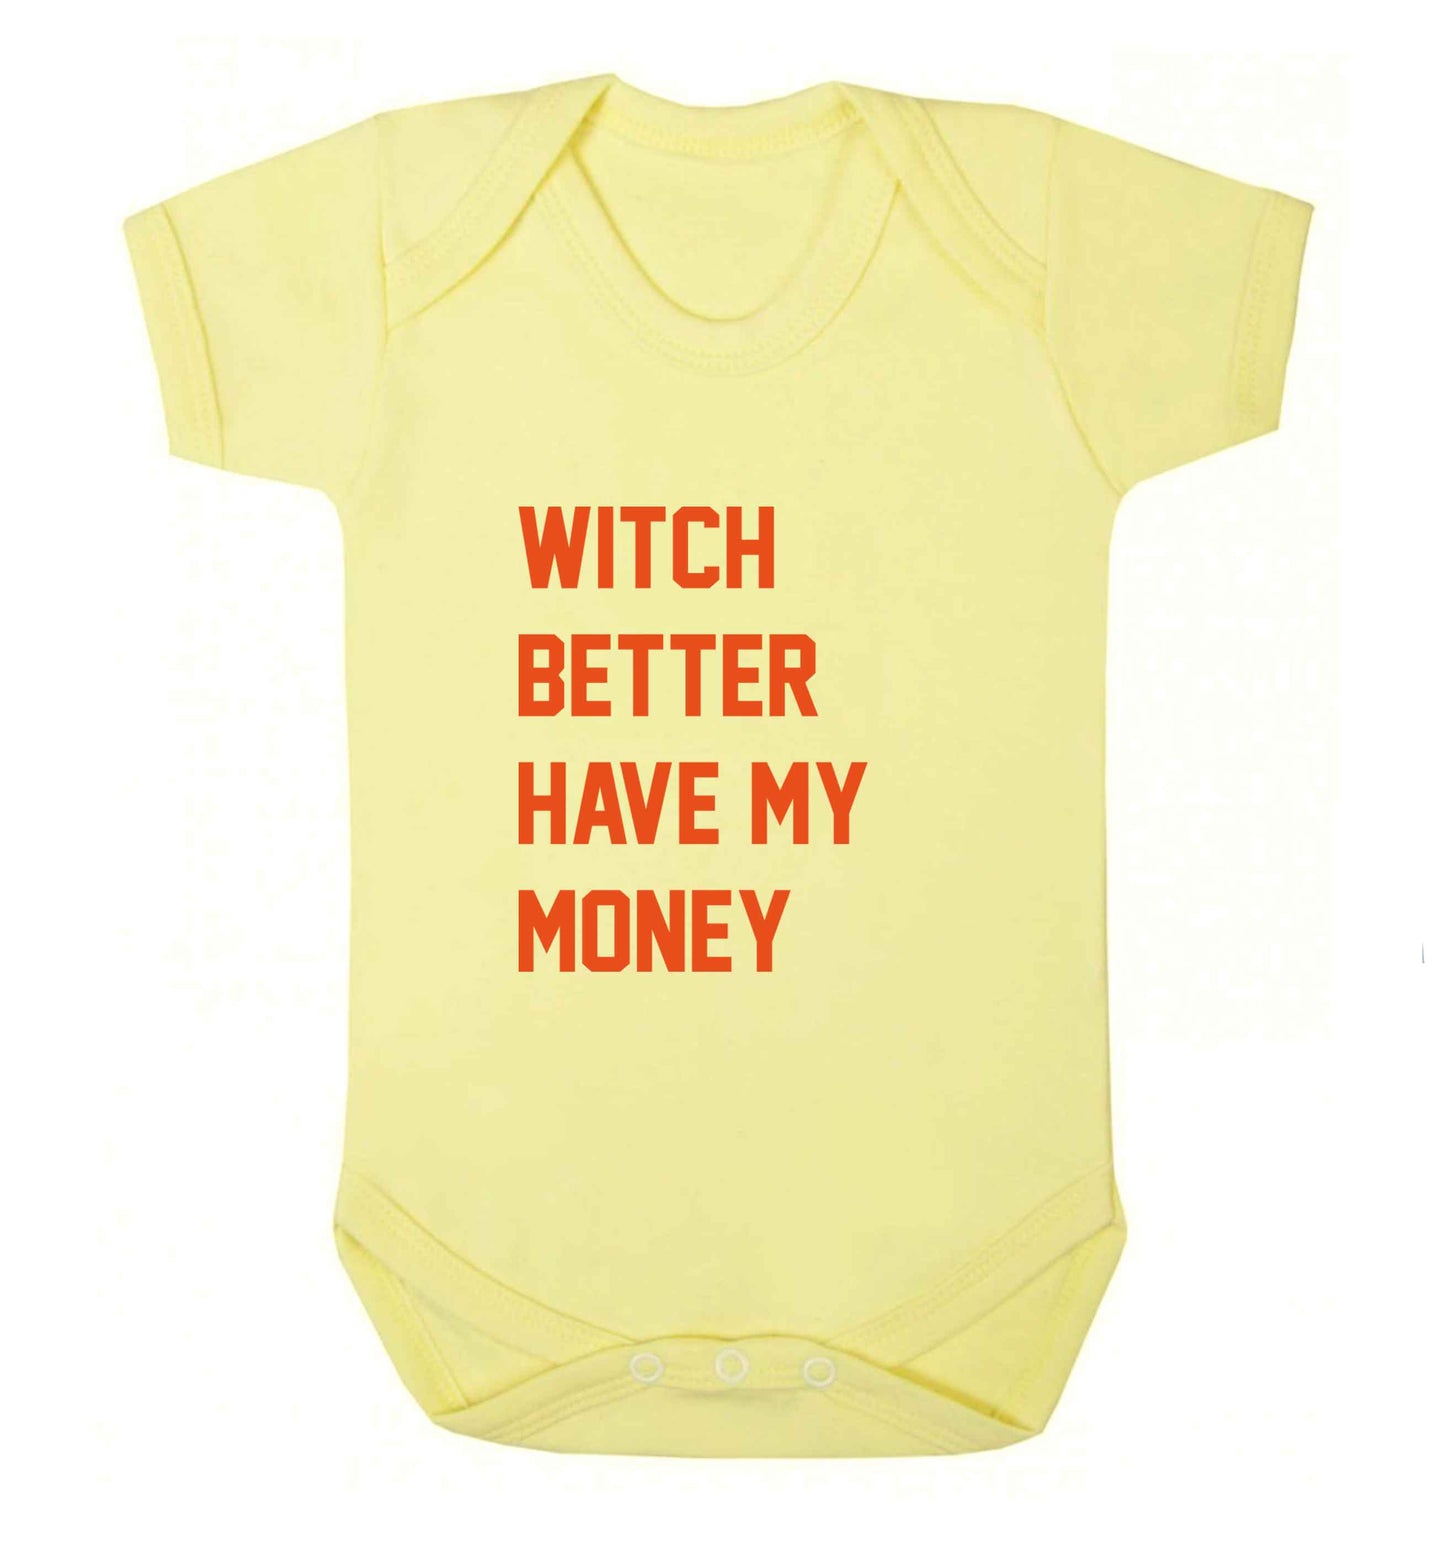 Witch better have my money baby vest pale yellow 18-24 months